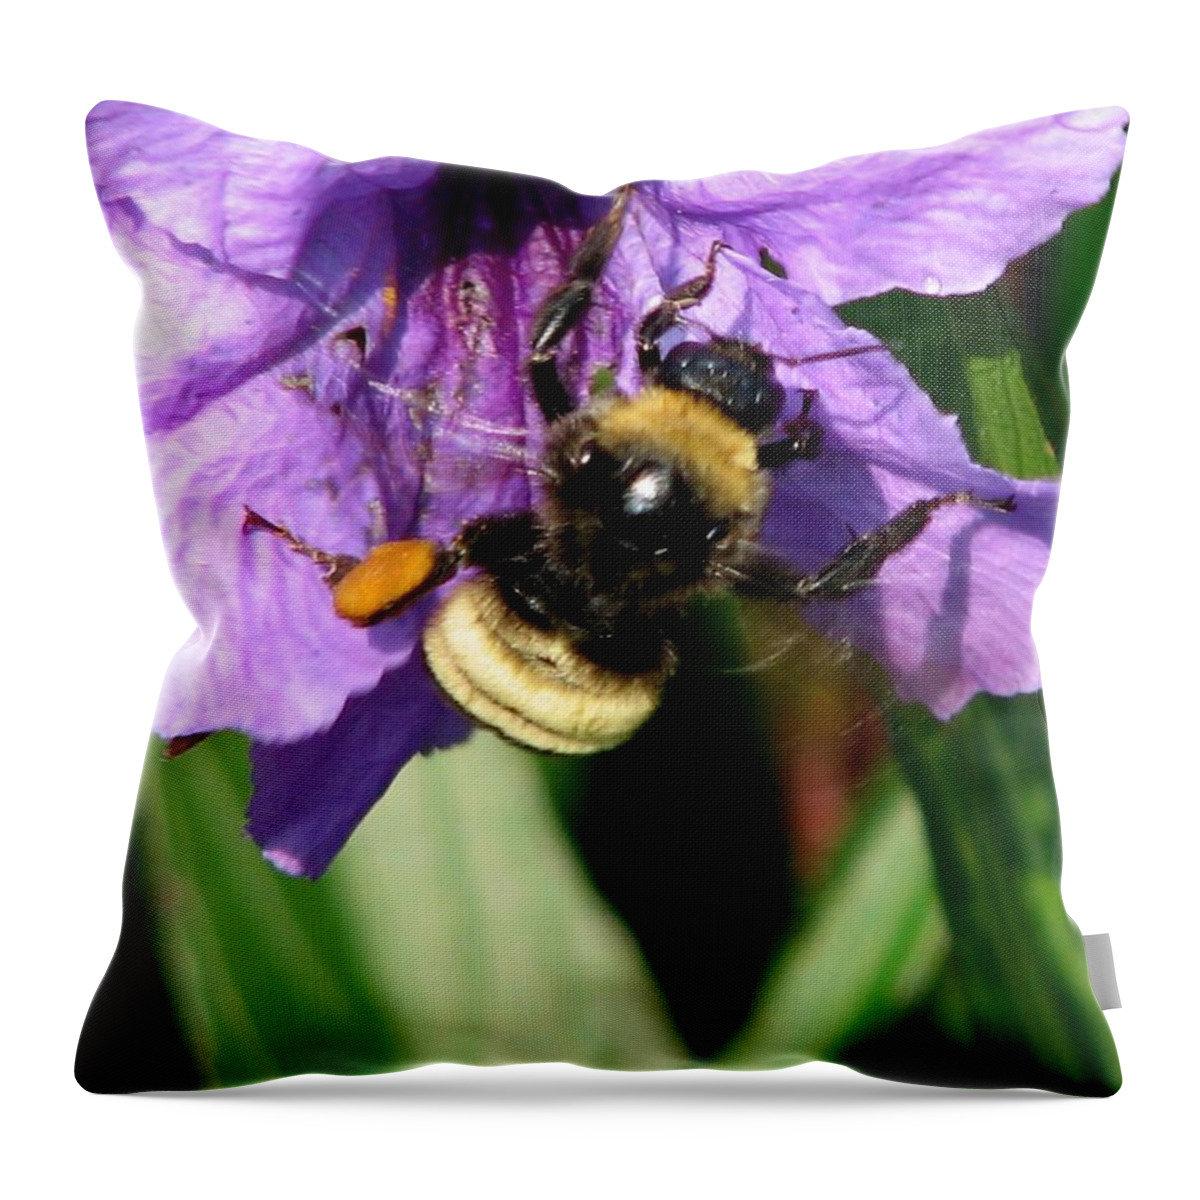 Pollination Throw Pillow featuring the photograph Pollination 2 #1 by J M Farris Photography